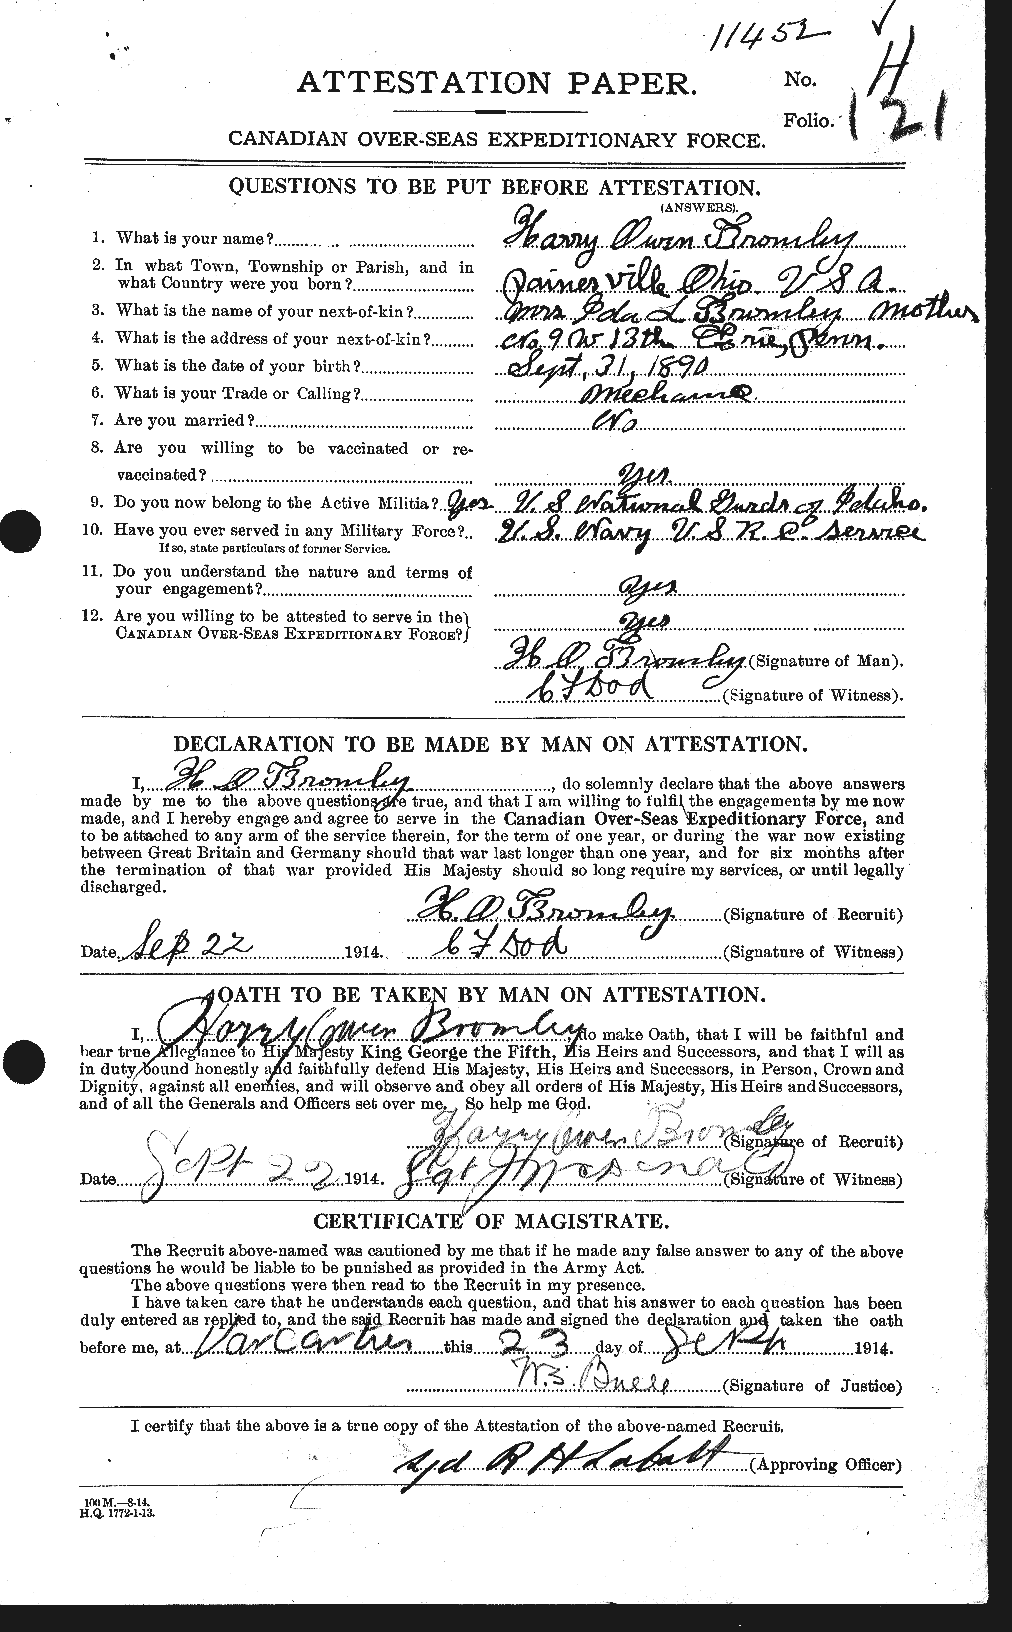 Personnel Records of the First World War - CEF 262173a